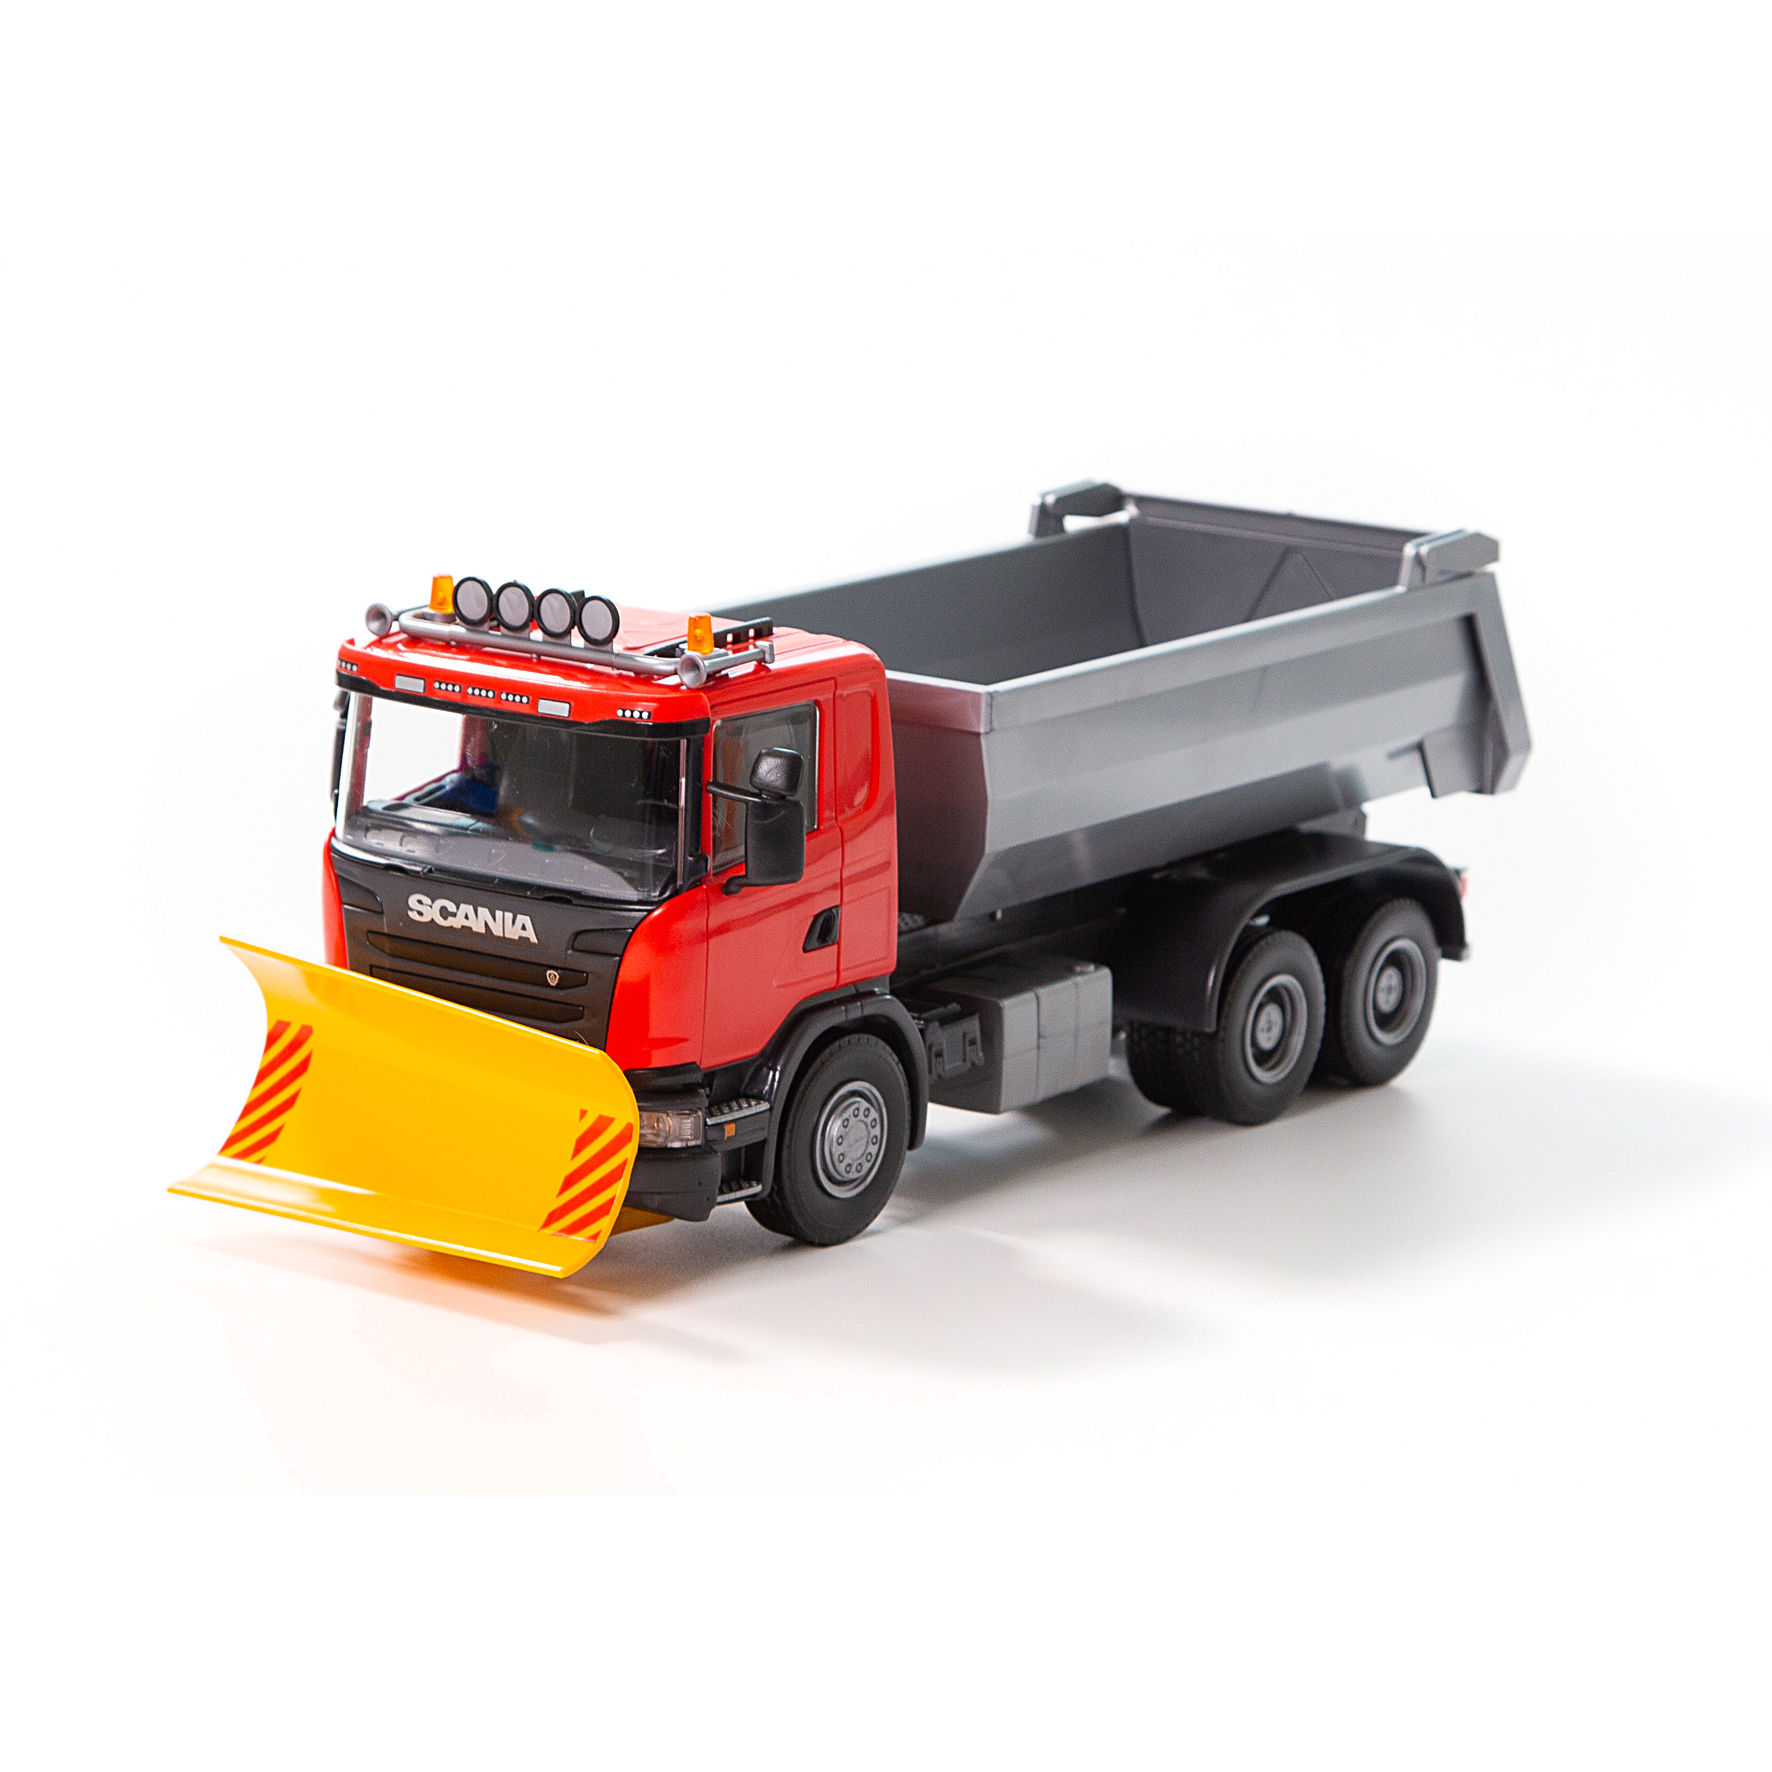 Toy trucks emek toy car tipper with plow scania red 1:25